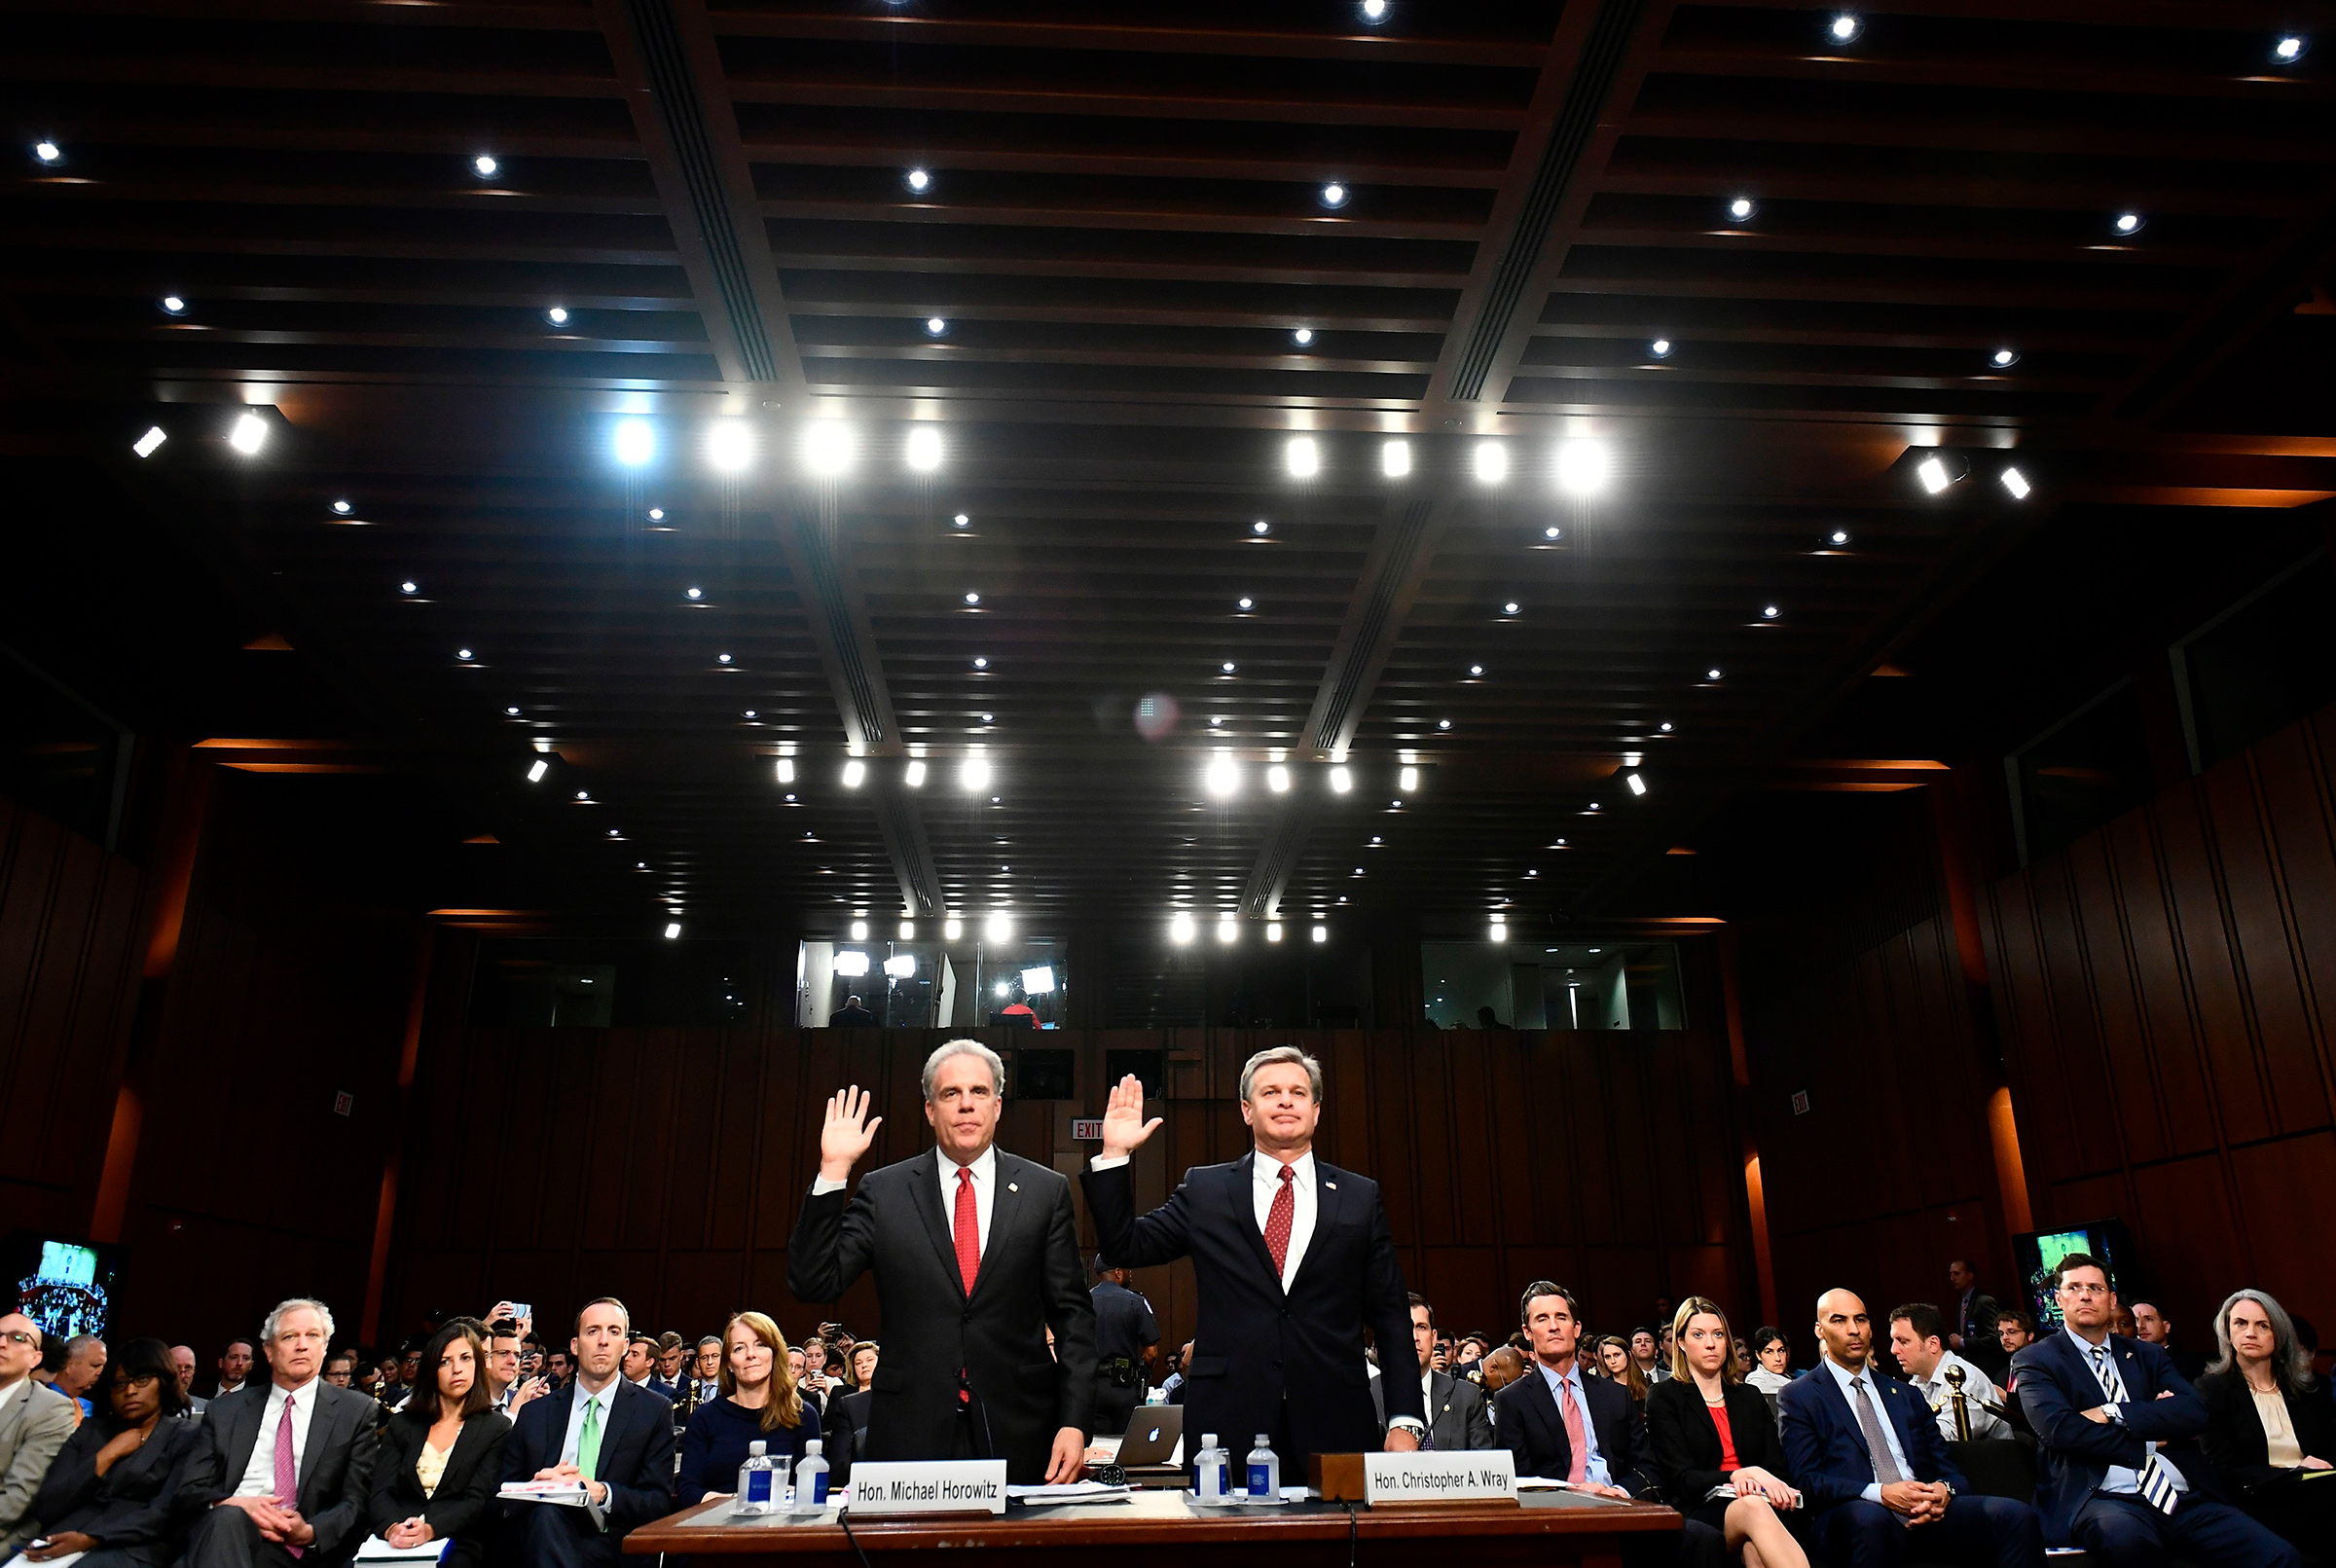 Justice Department Inspector General Michael Horowitz, left, and FBI Director Christopher Wray take an oath before testifying to the Senate Judiciary Committee in Washington, DC on June 18, 2018. (Mandel Ngan—AFP/Getty Images)